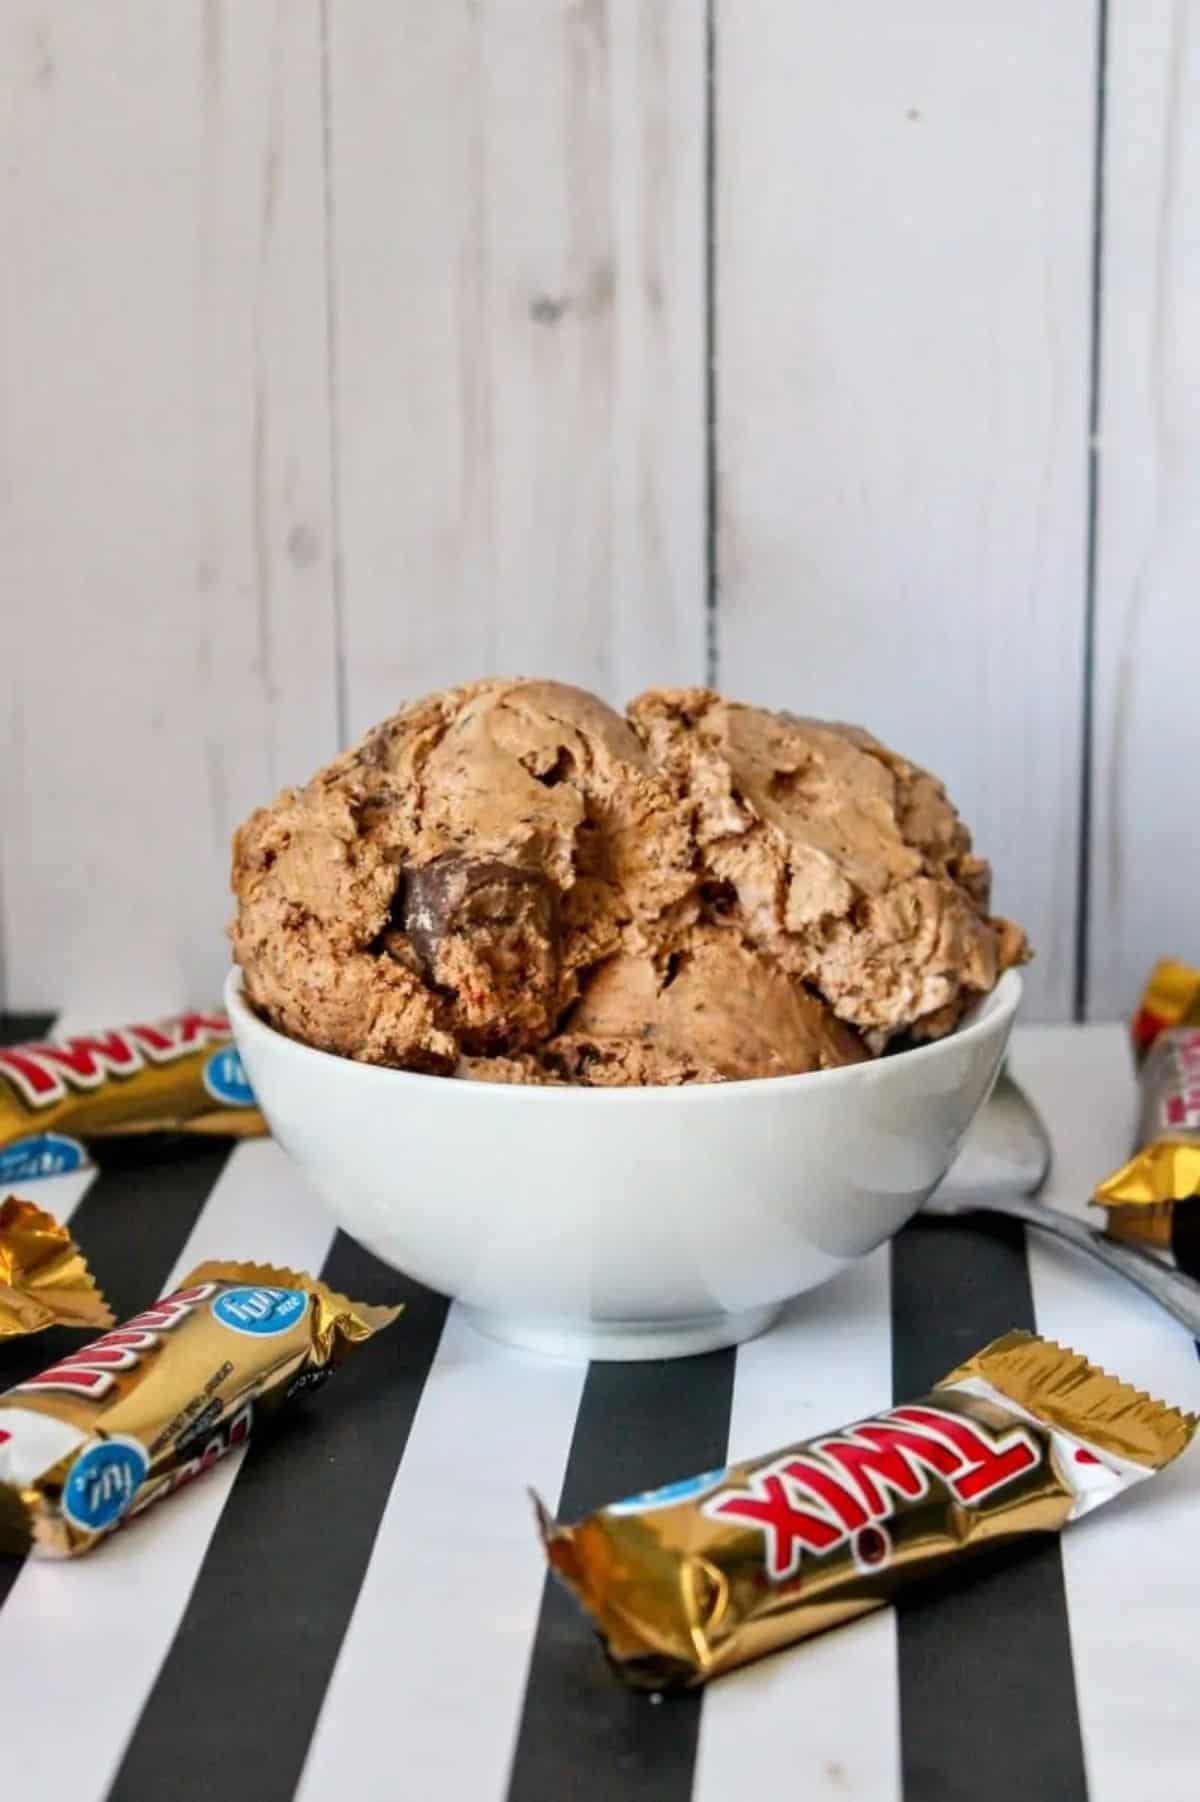 Twix Ice Cream in a white bowl with twix bars scattered around.